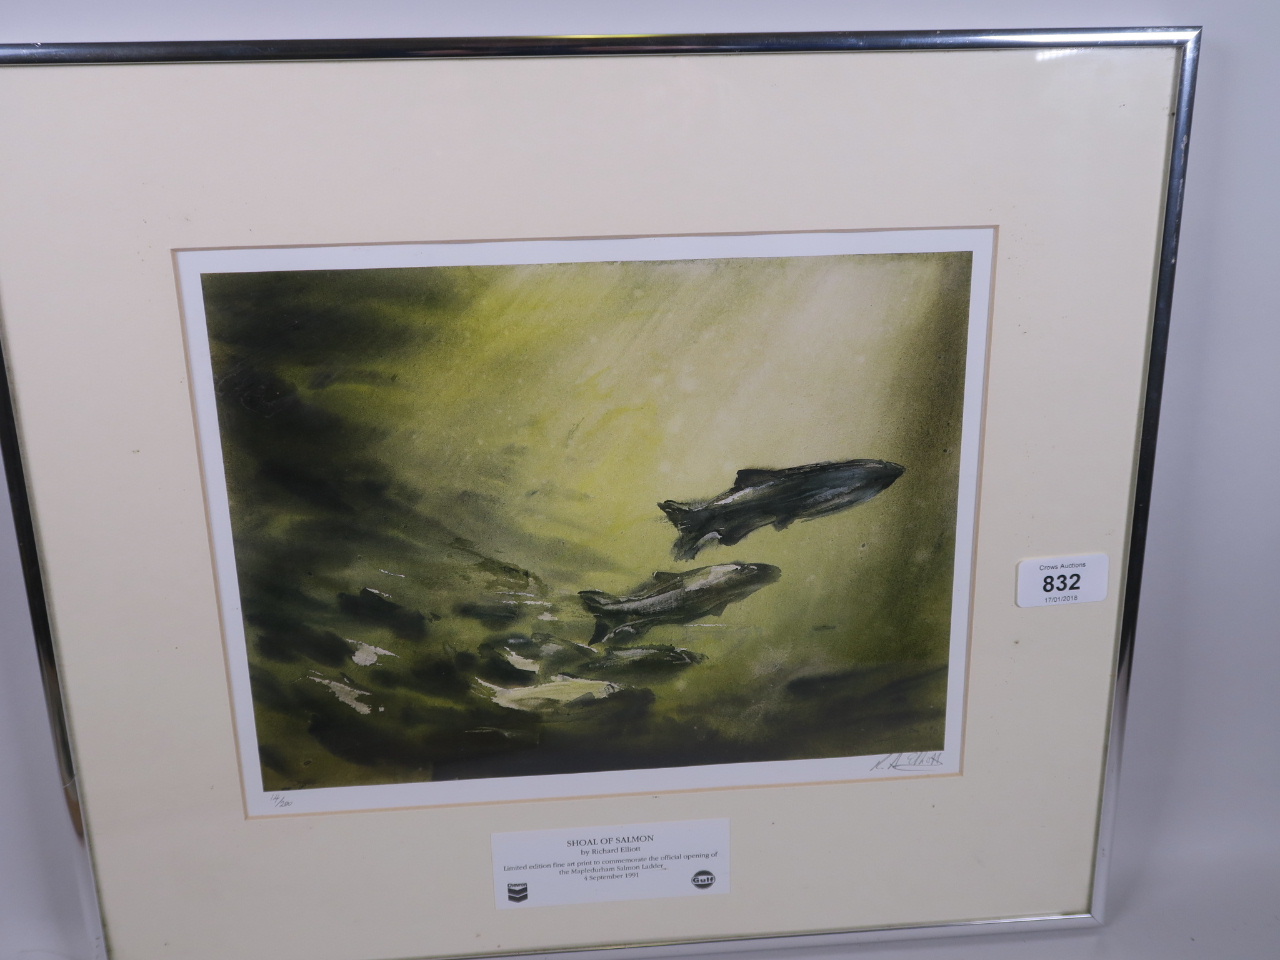 Richard Eliott - limited edition fine art print of leaping salmon, signed in pencil and numbered - Image 3 of 3